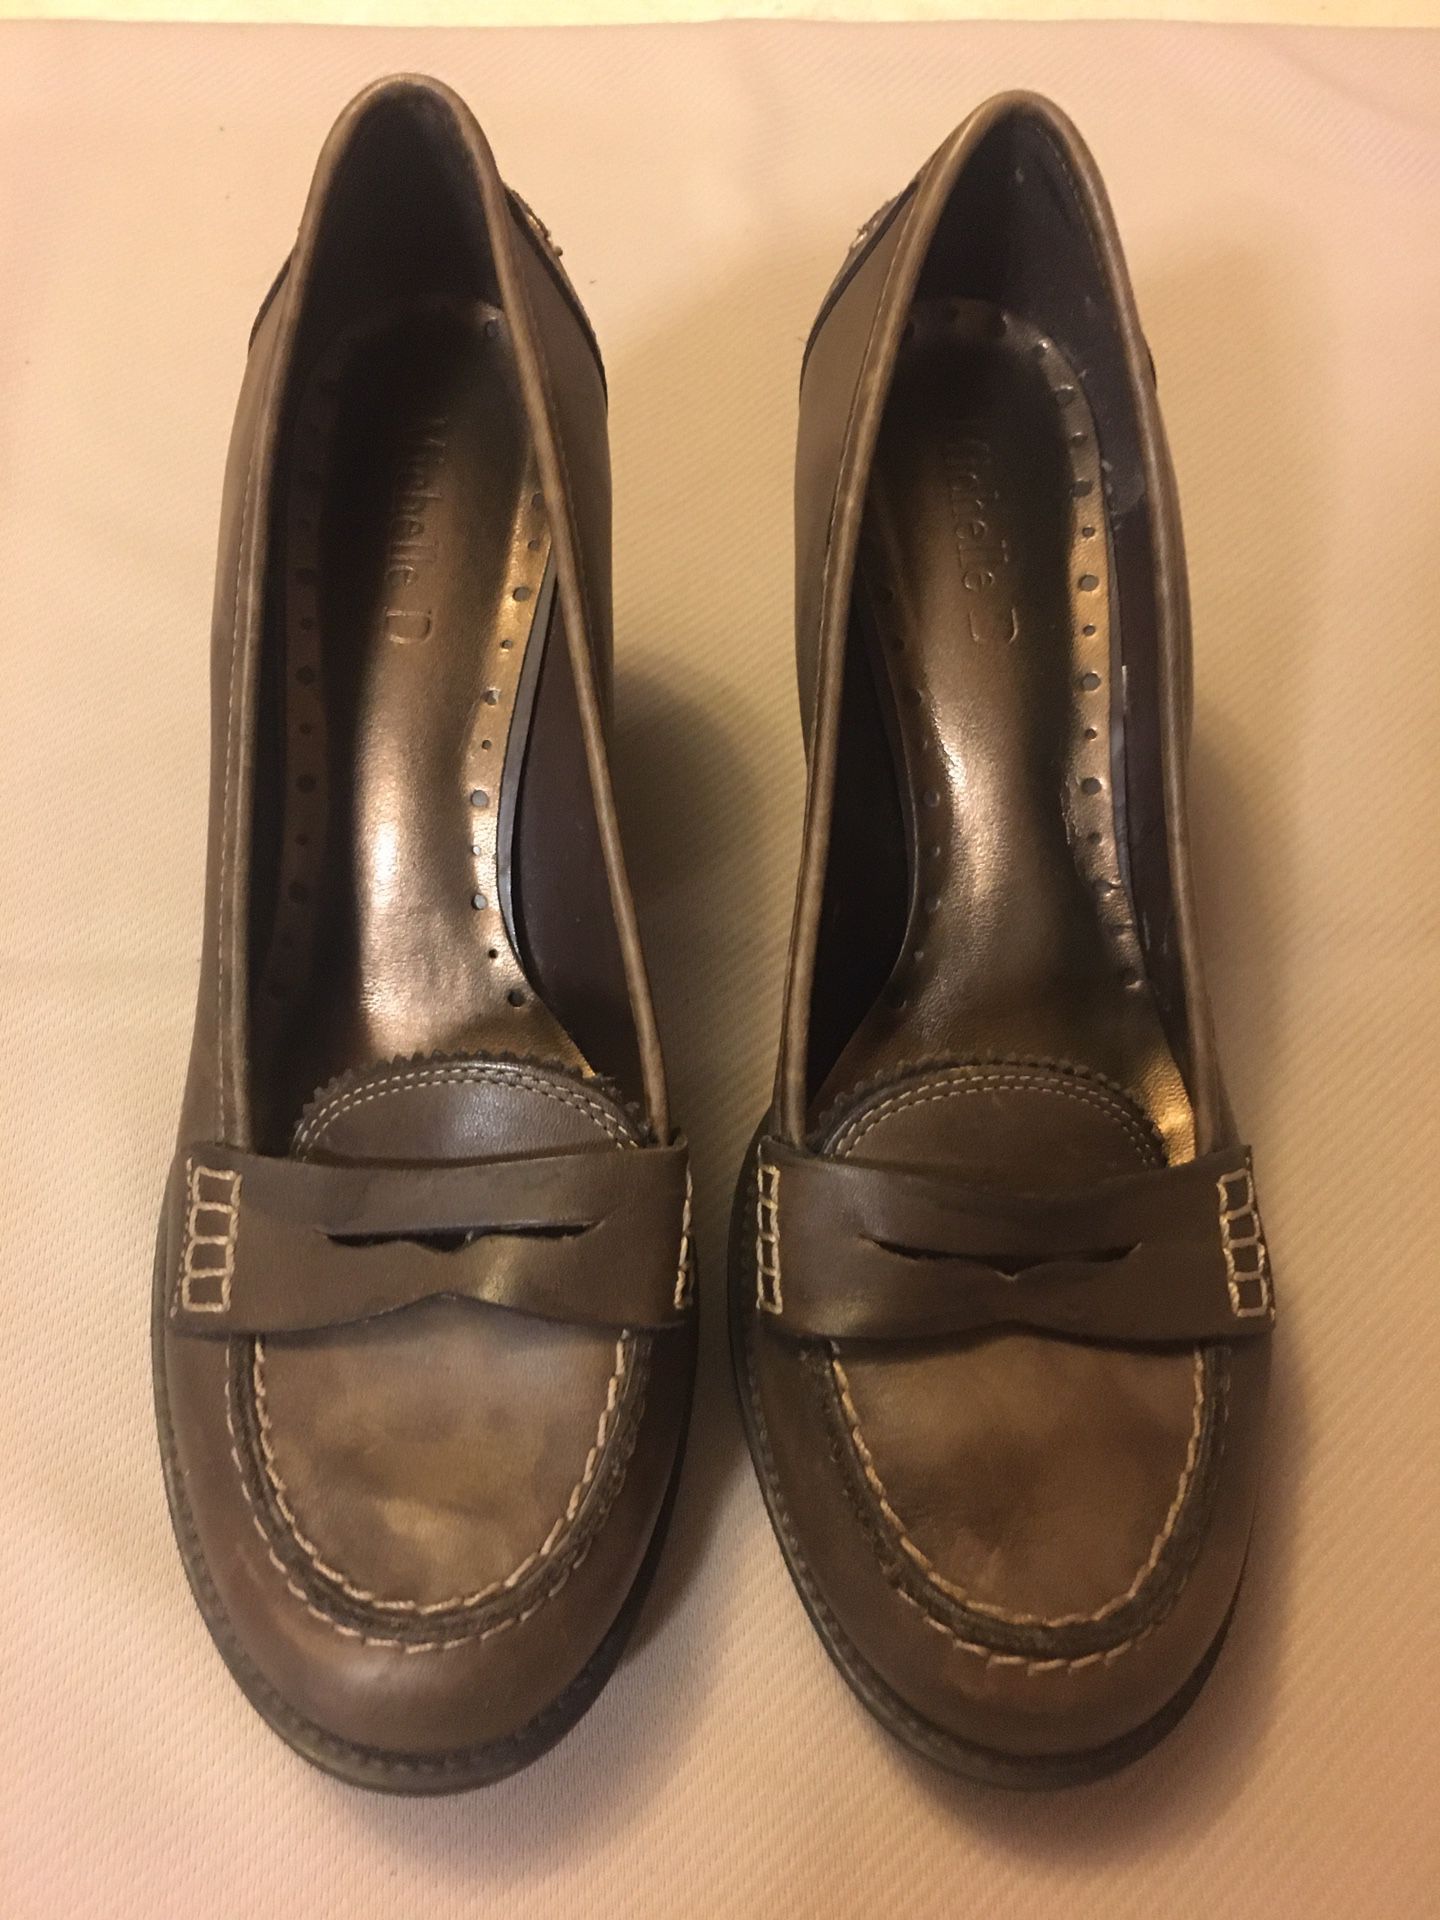 Mudd “Michelle D” High Heel Loafers Size 7.5 M, Brown